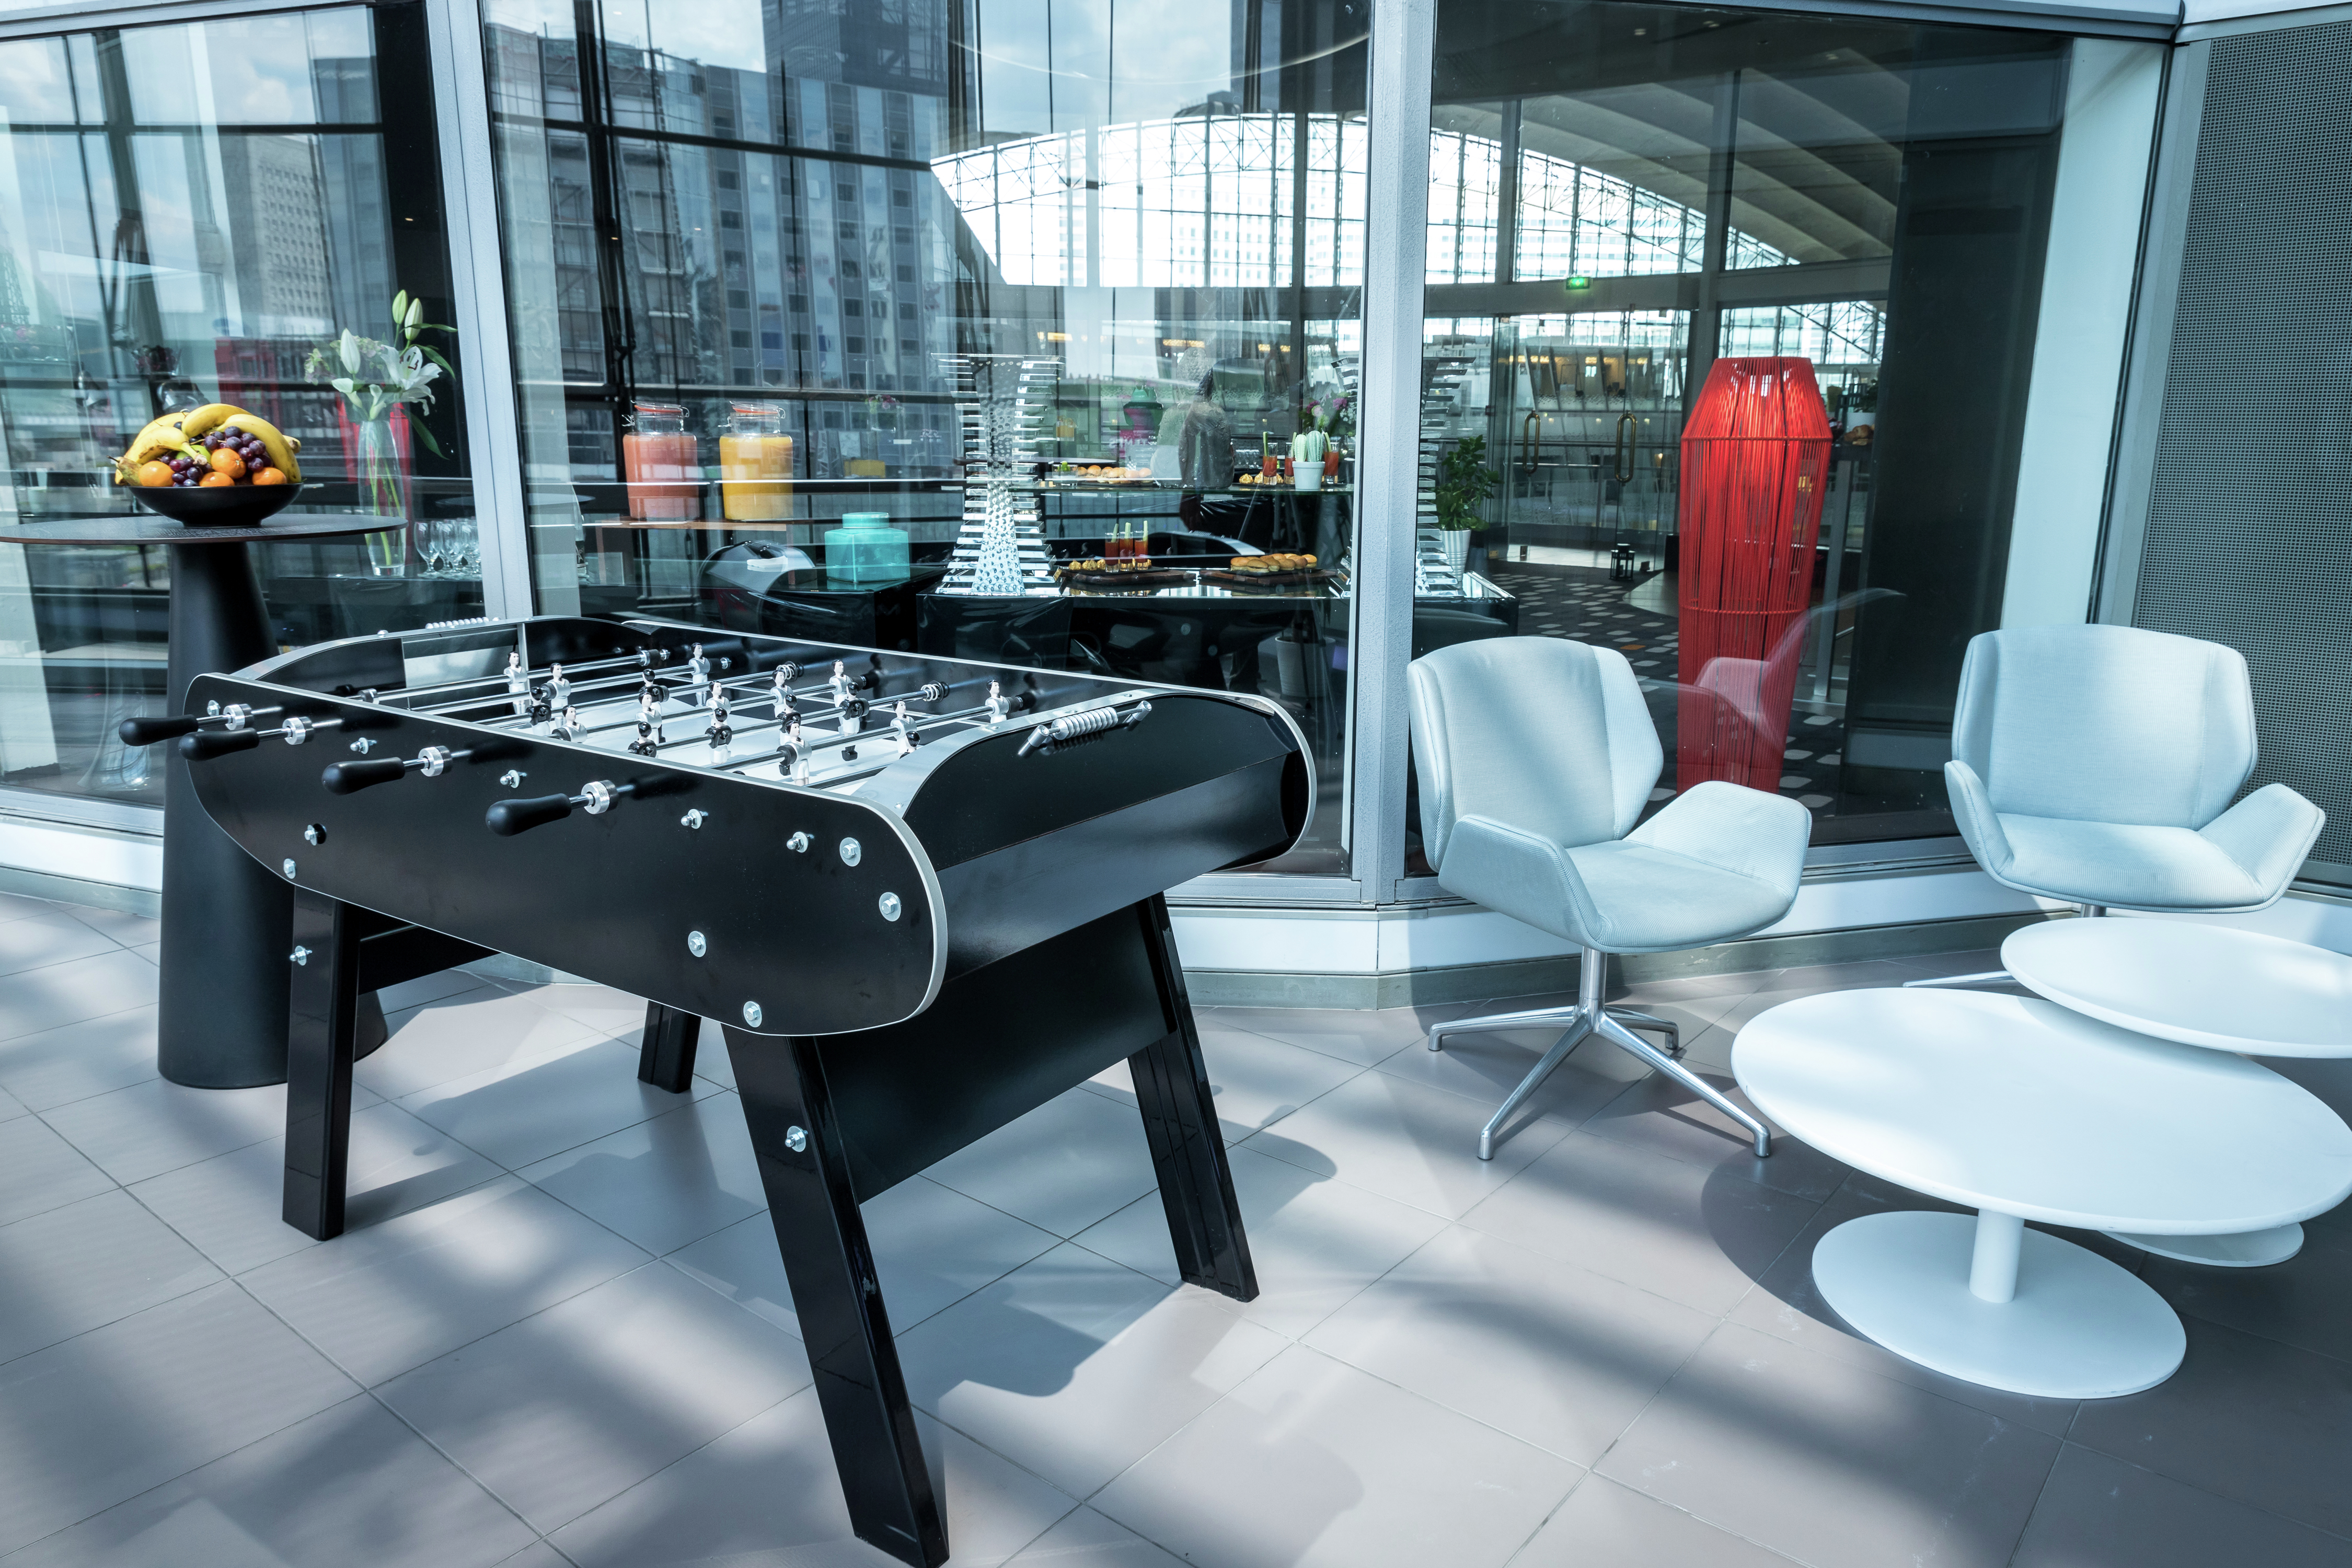 Outdoor Bar Area with Fussball Table, Two Chairs and a Table